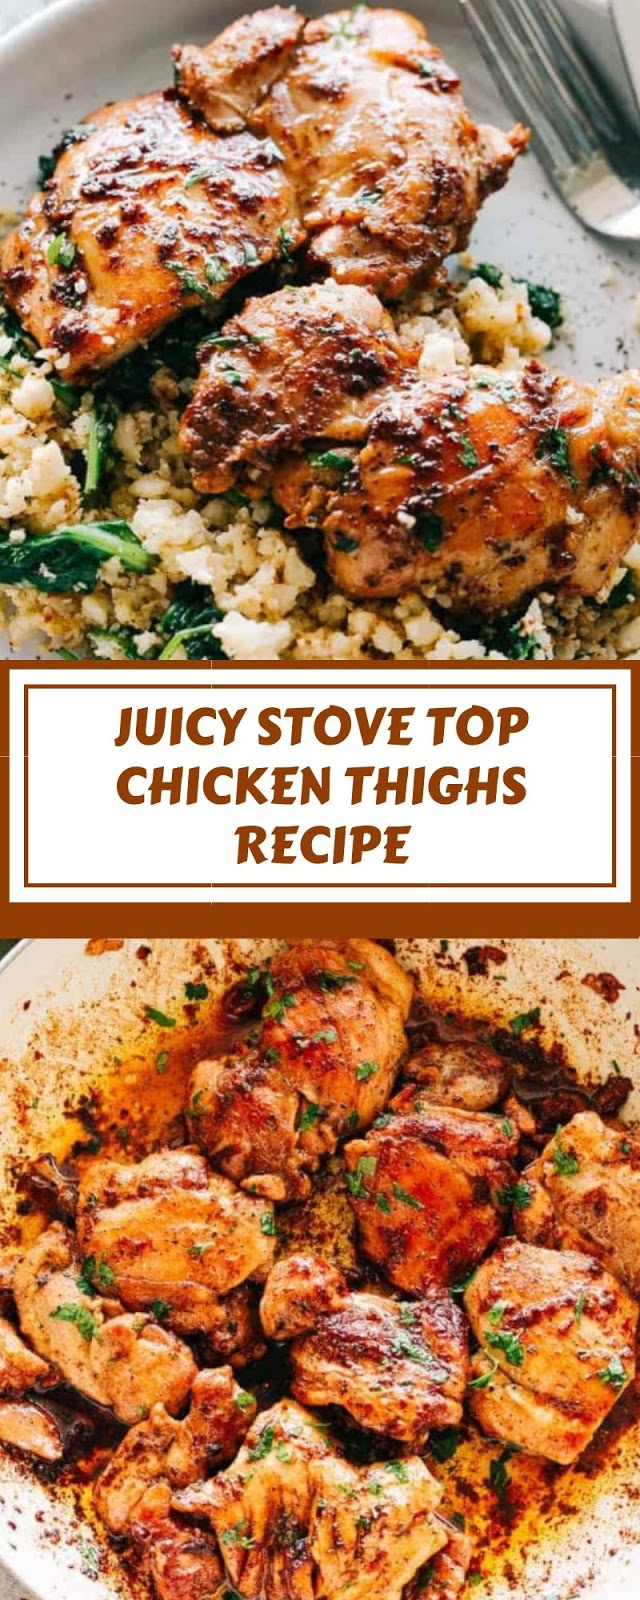 JUICY STOVE TOP CHICKEN THIGHS RECIPE